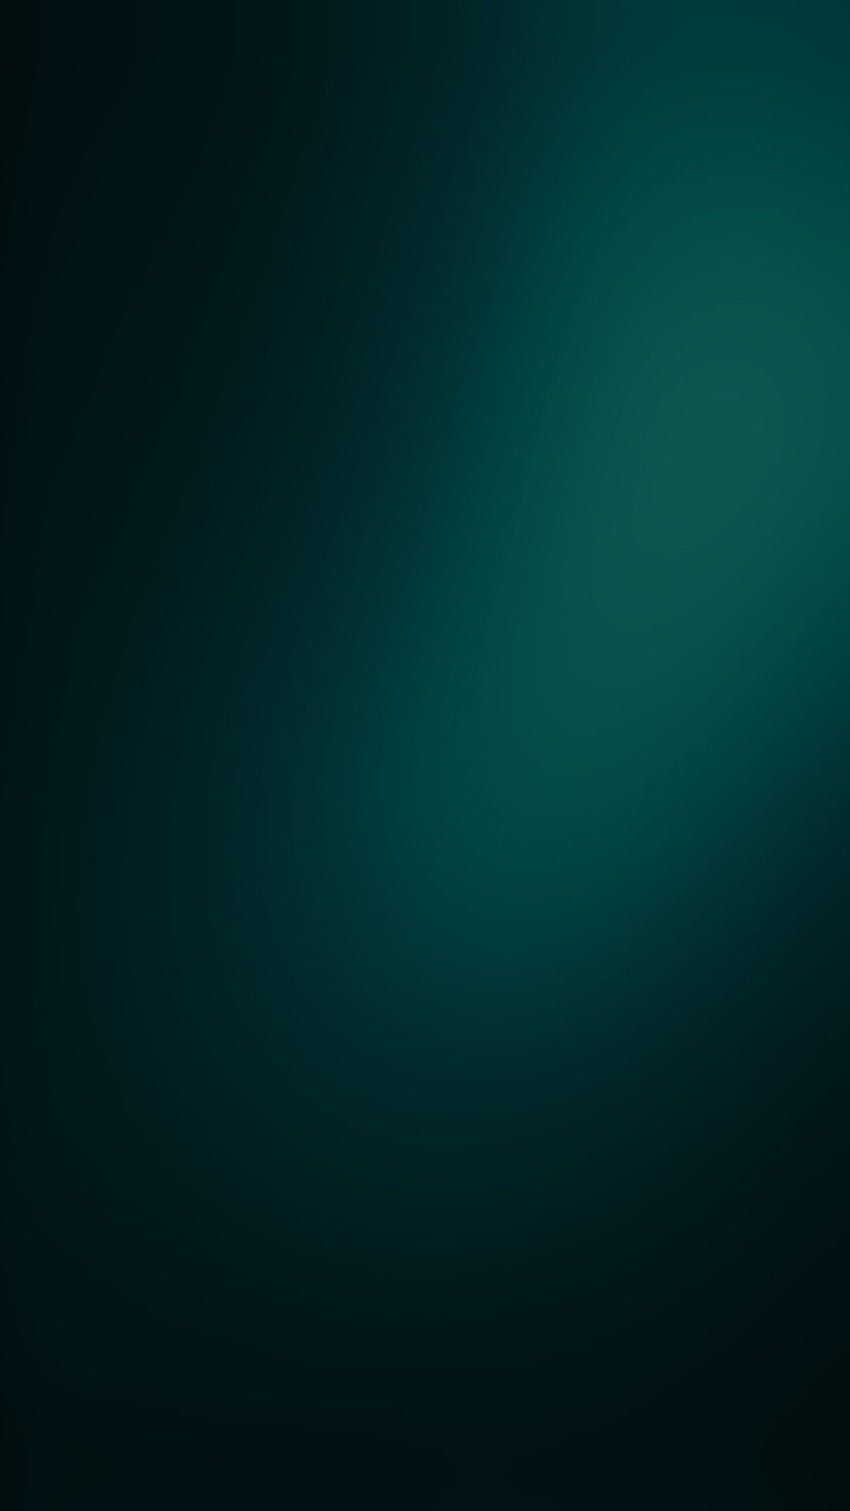 Black and Teal - , Black and Teal Background on Bat, Black Turquoise HD phone wallpaper